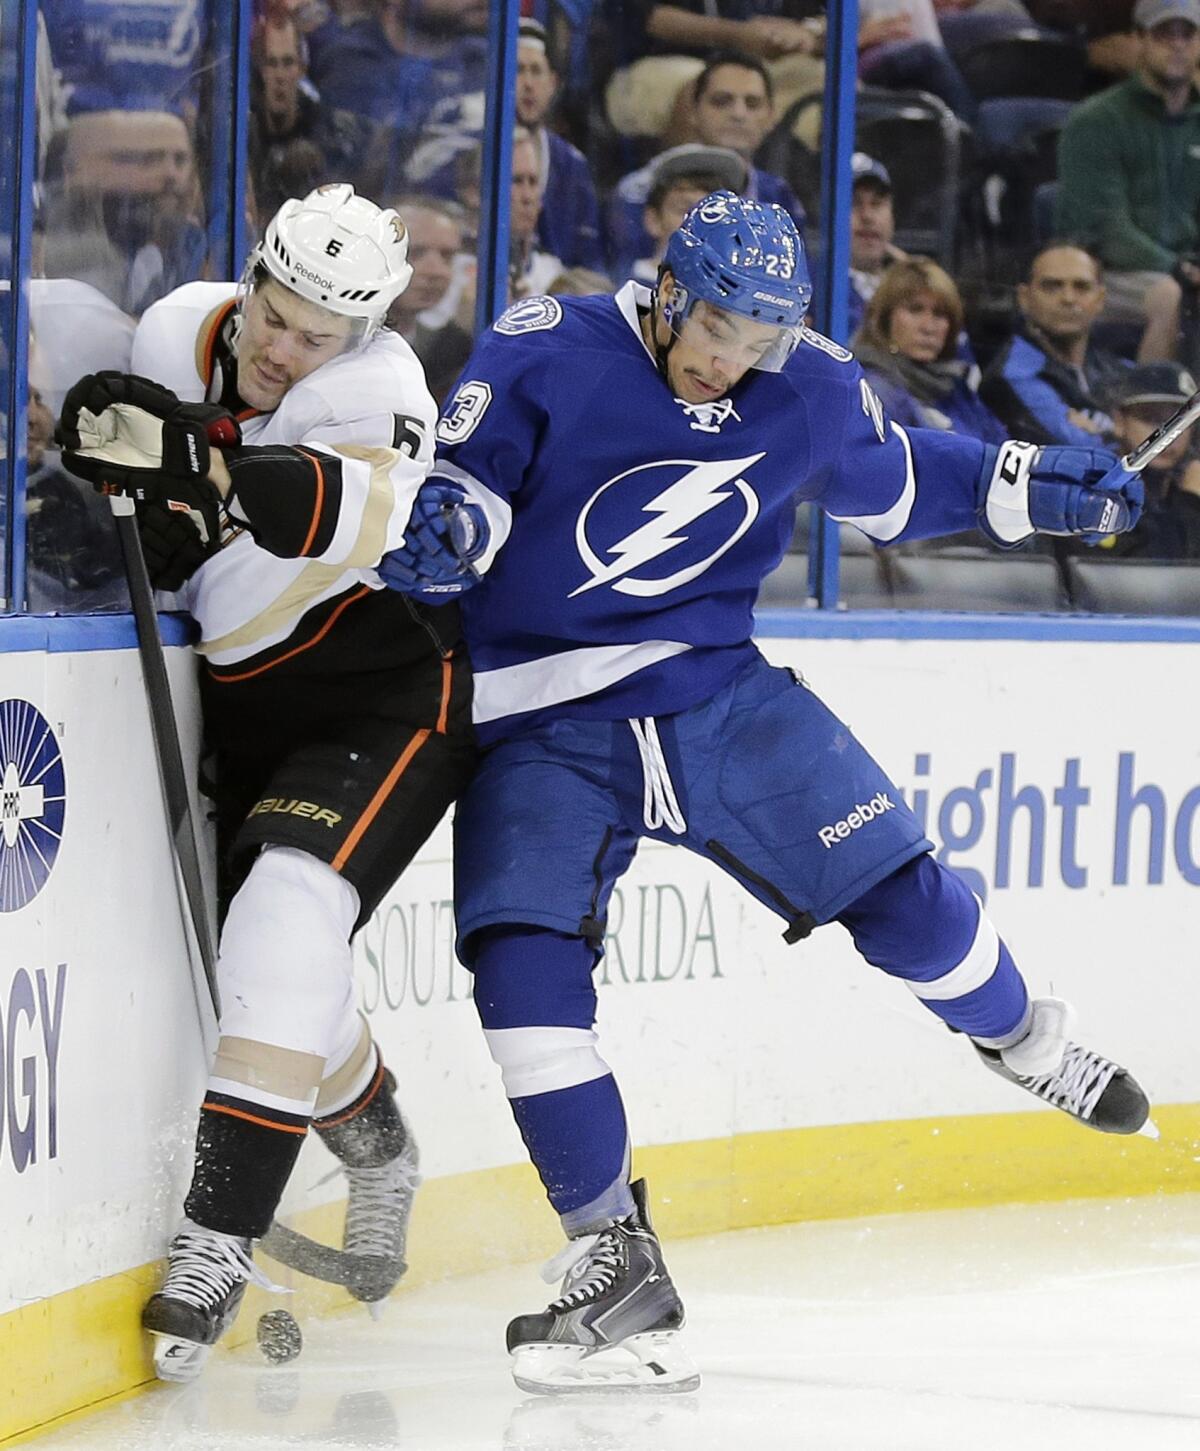 Ducks defenseman Ben Lovejoy, left, is checked into the boards by Tampa Bay Lightning right wing J.T. Brown during the second period of the Ducks' 5-1 loss Thursday.